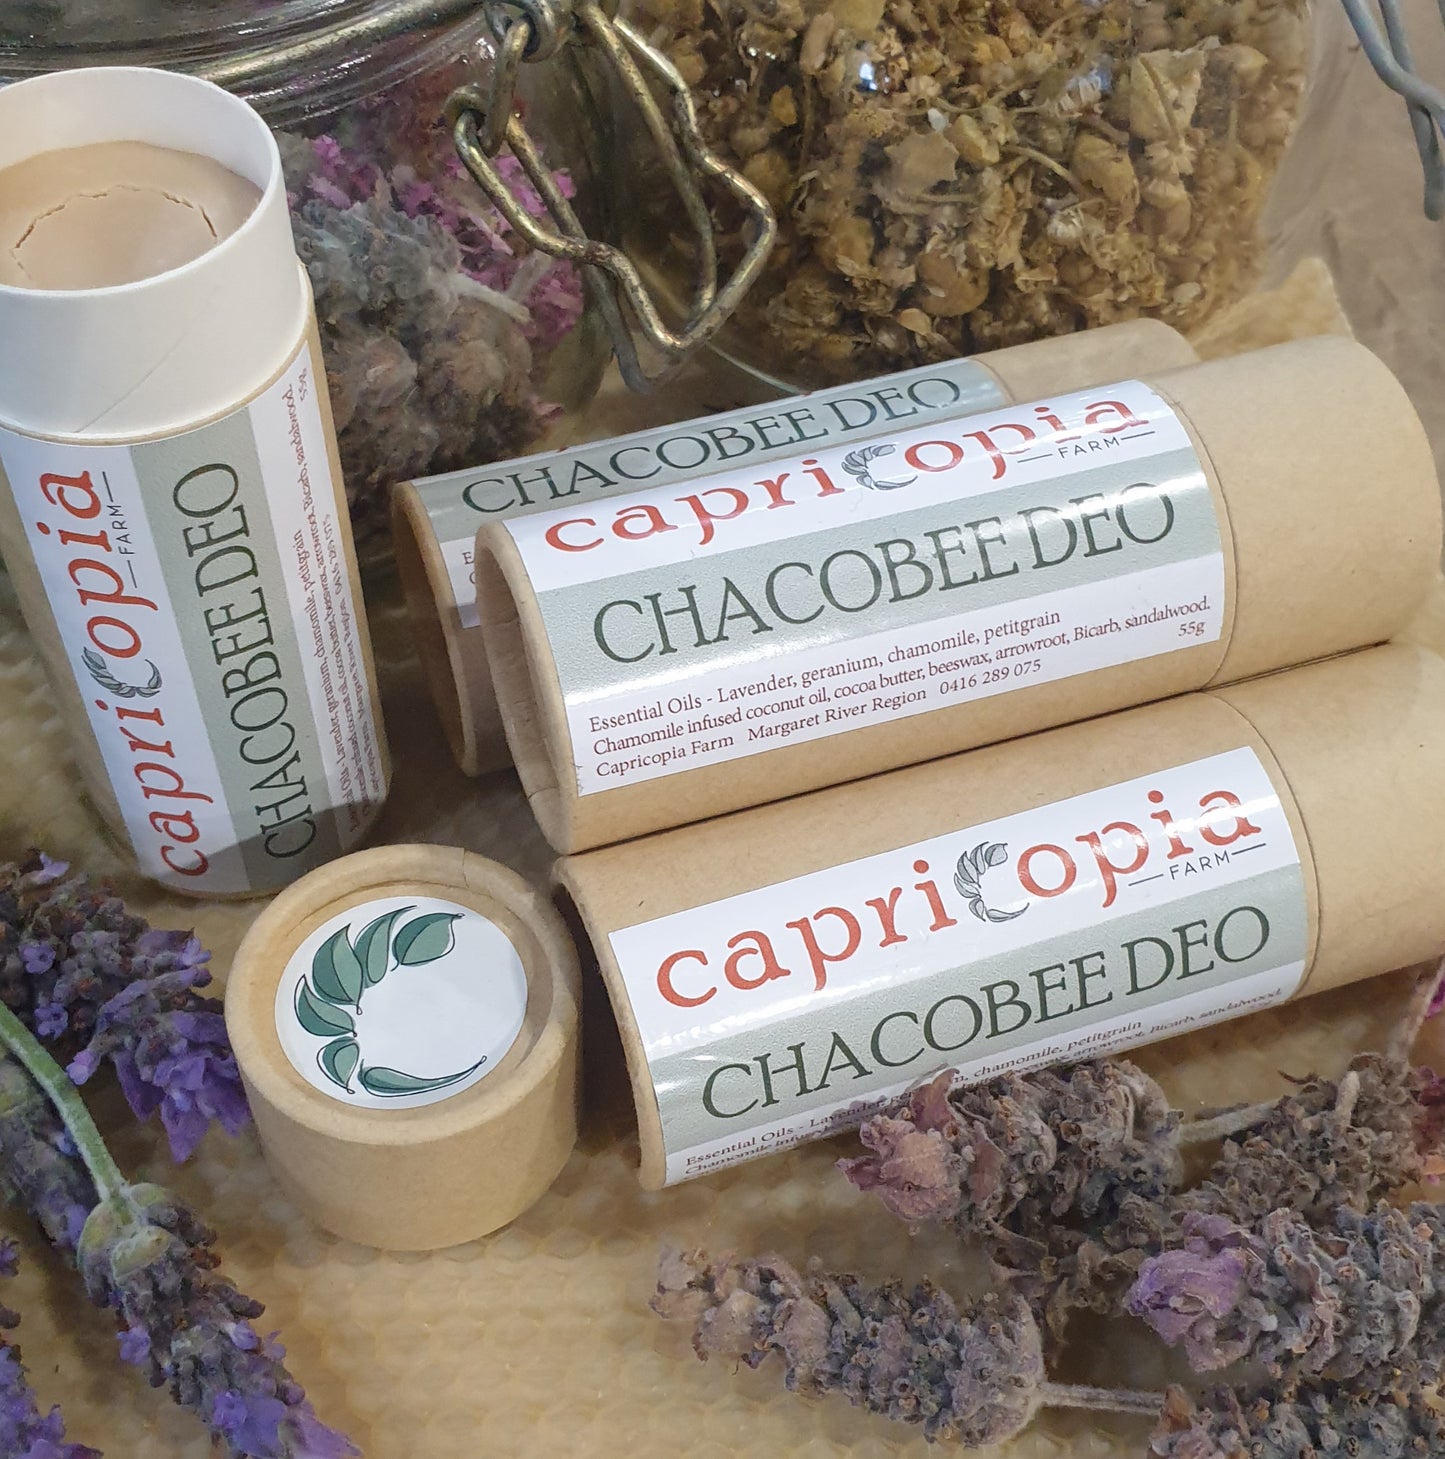 Chamomile infused soothing natural deodorant